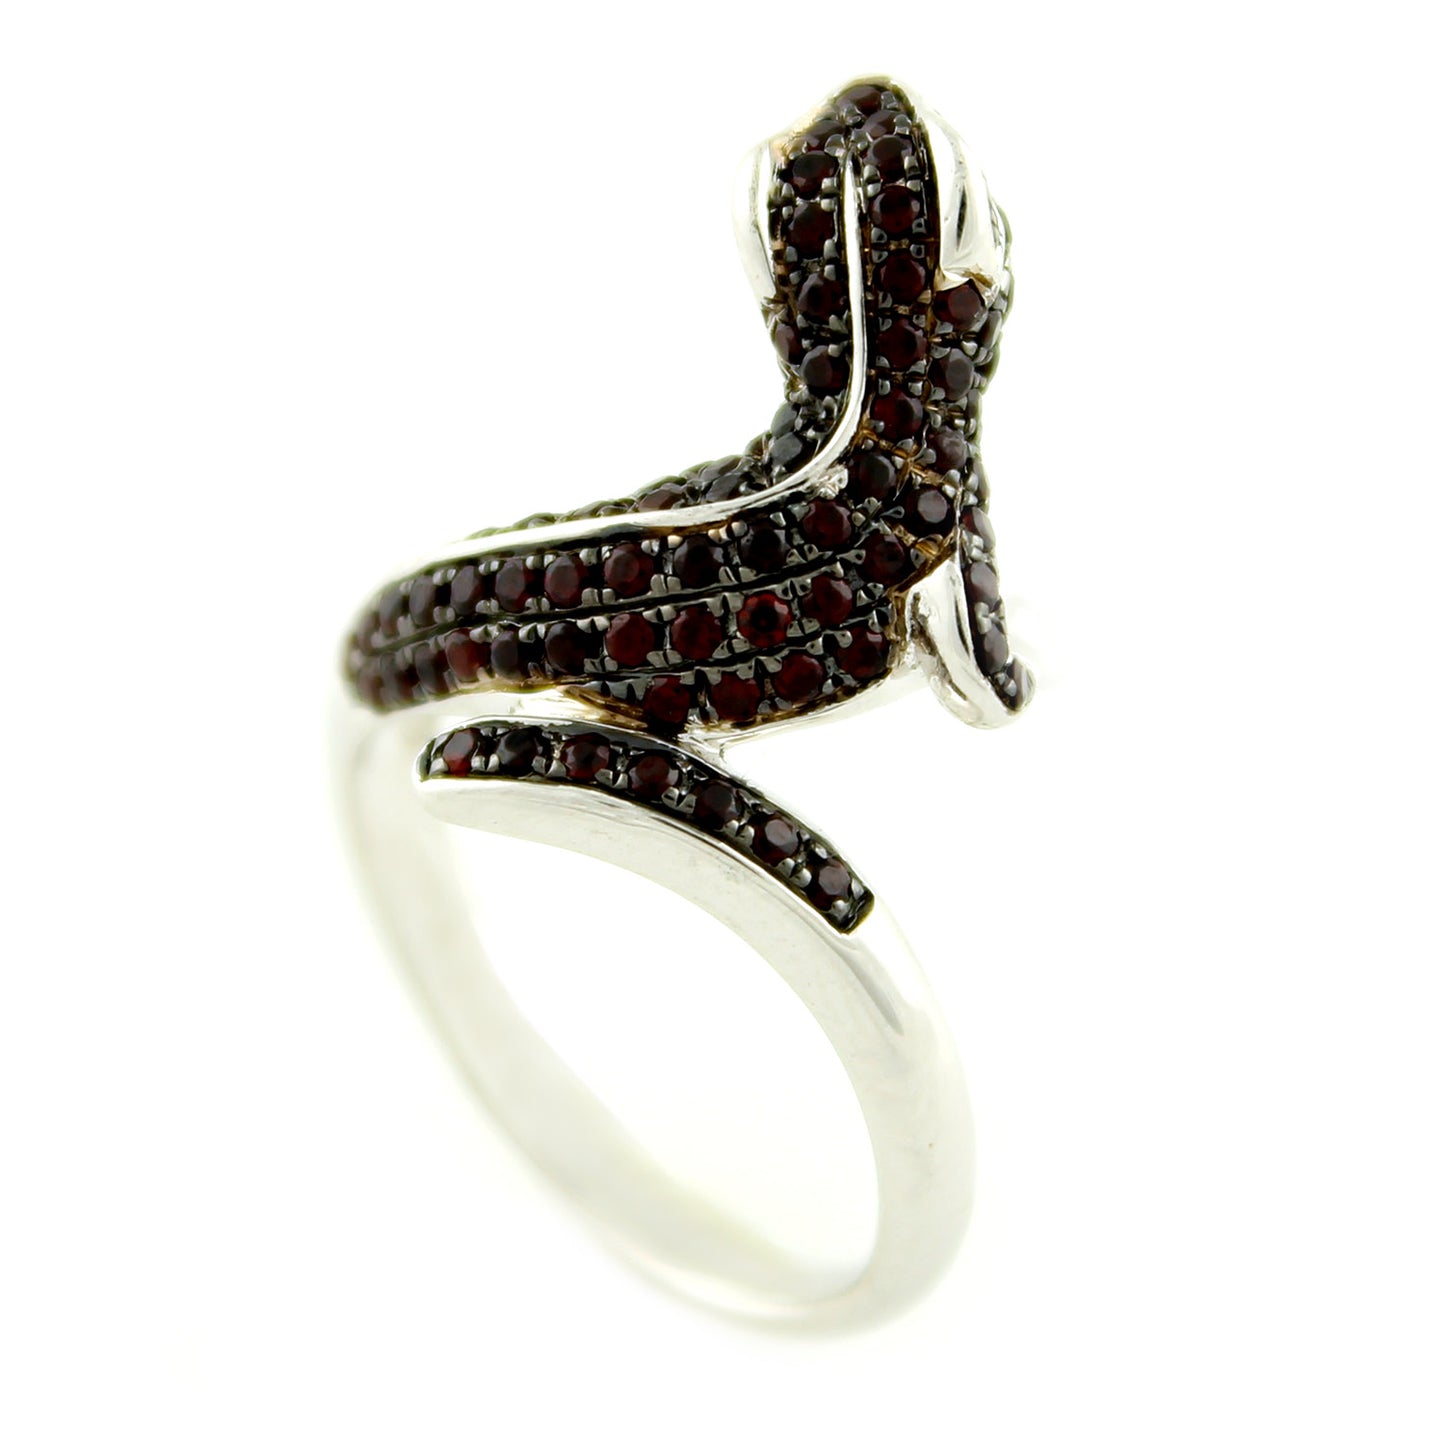 Pinctore Sterling Silver 1.40ctw Chinese Garnet Chameleon Shaped Ring